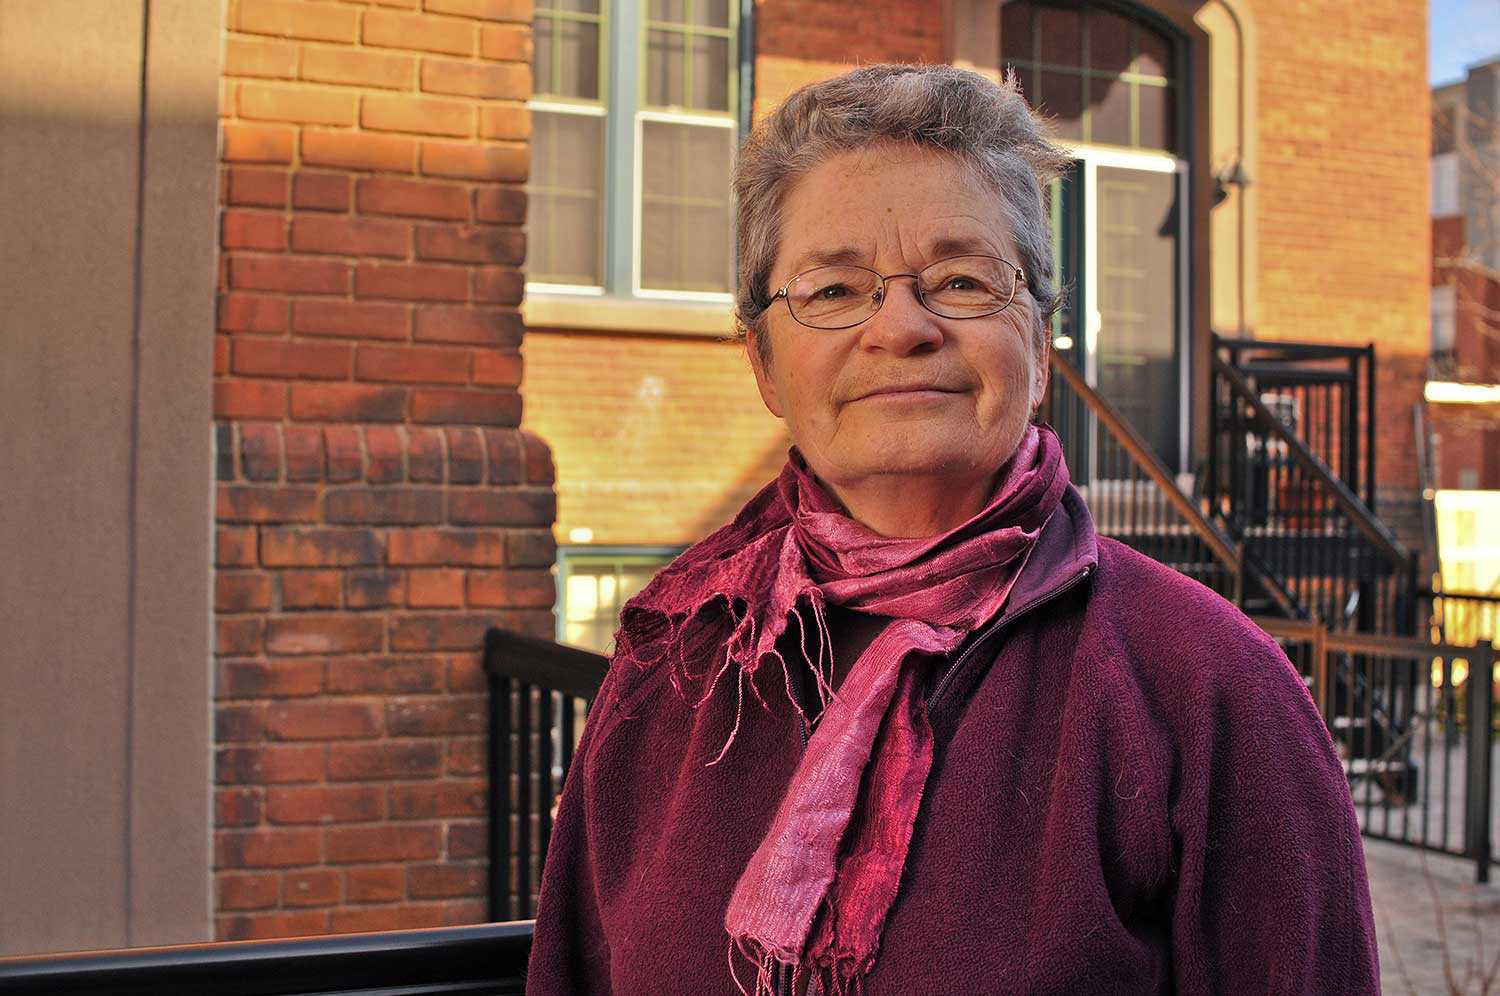 One heritage volunteer and activist is Linda Hoad, a retired librarian who has an encyclopedic knowledge of Hintonburg’s history and whose research has saved city staff hours of work over the years.